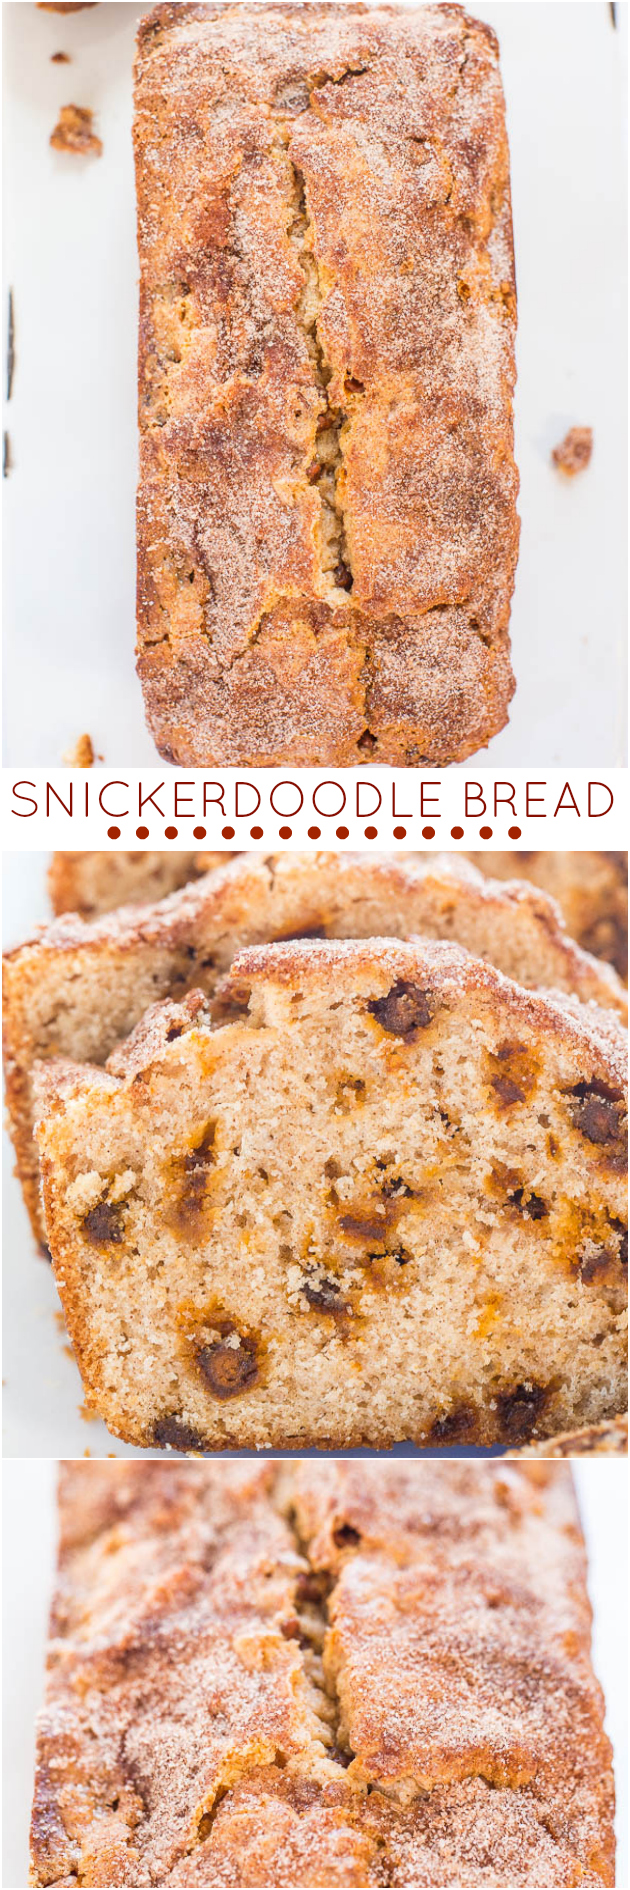 Snickerdoodle Bread - Bread that tastes like snickerdoodle cookies!! Loaded with cinnamon chips and a cinnamon-sugar crust! Delish!!!